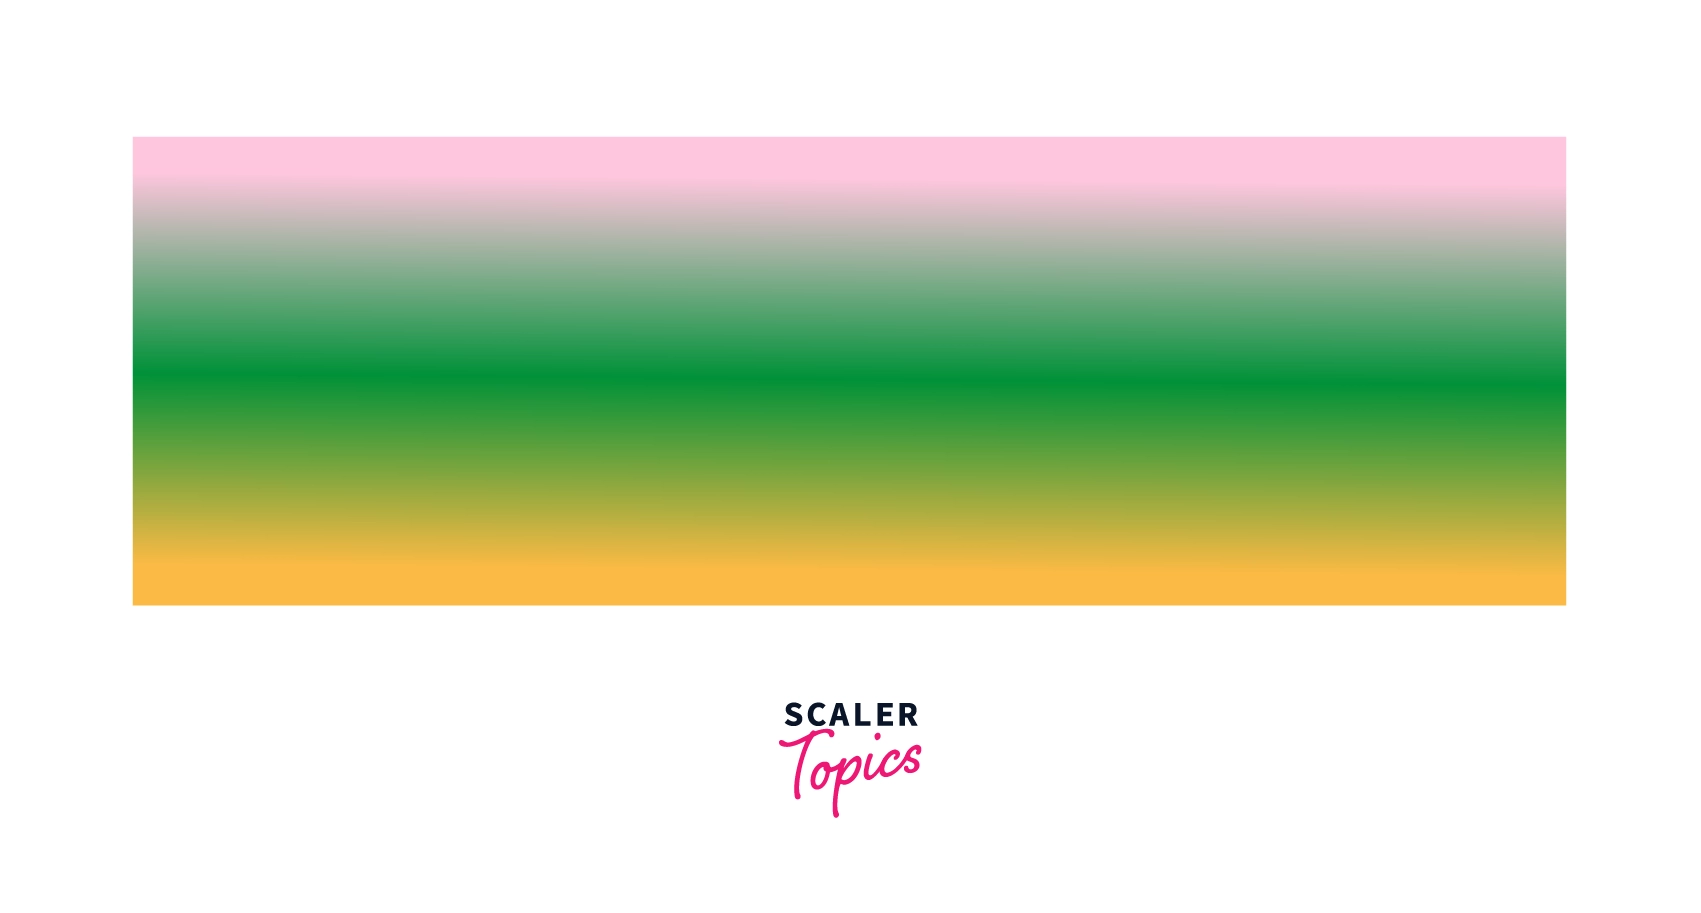 linear gradient transition among pink, green, and yellow